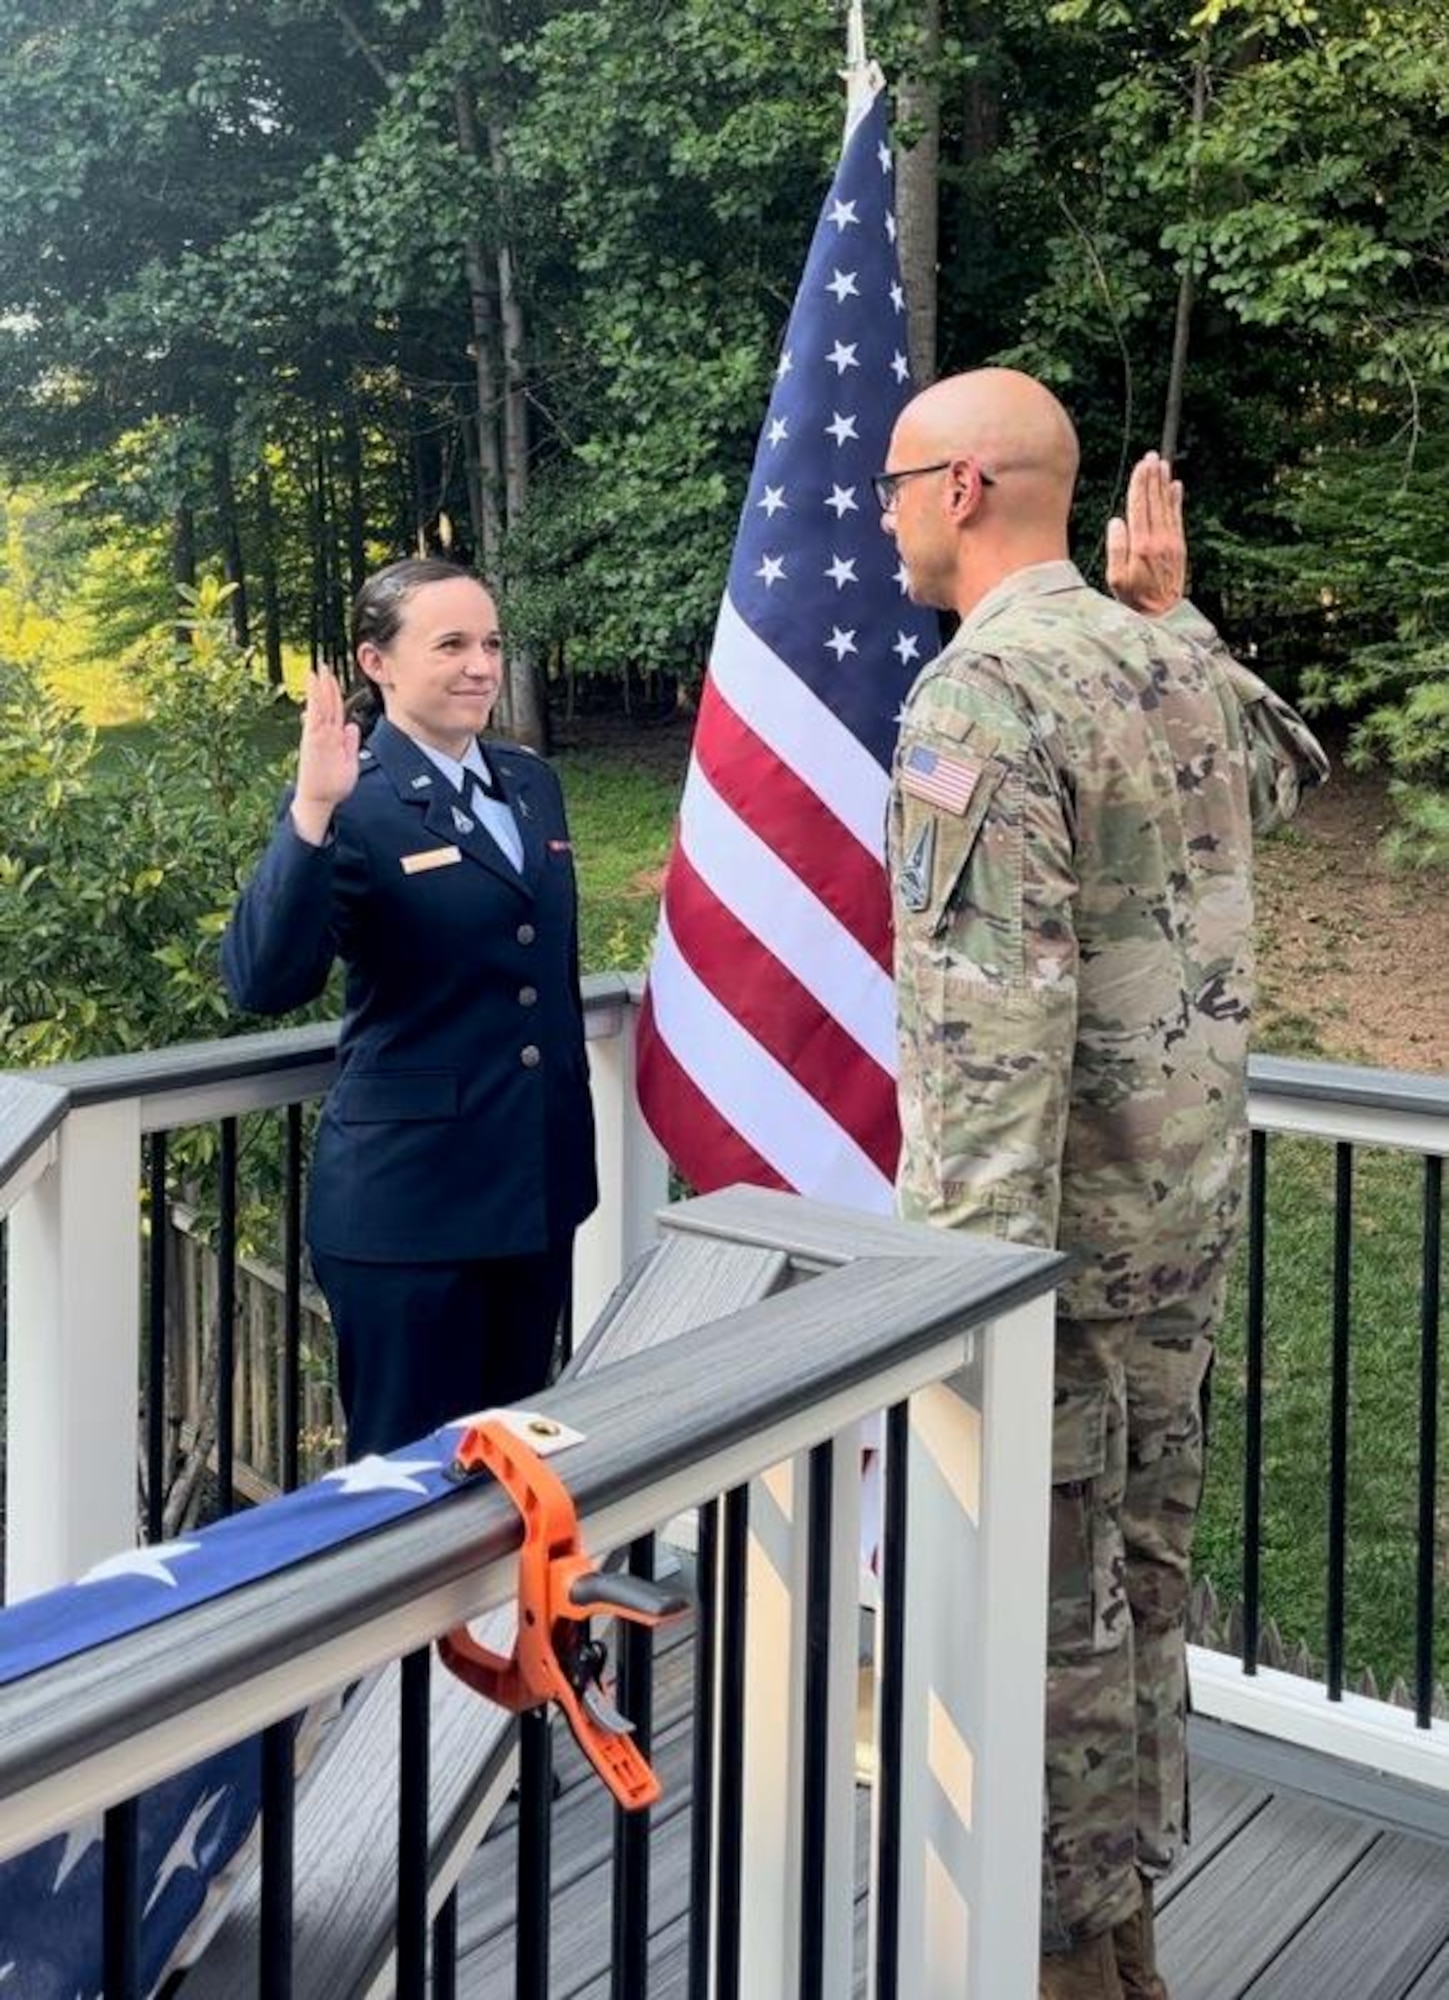 U.S. Space Force 2nd Lt. Josephine Lerner administers the oath of office for Chief Master Sgt. of the Space Force John F. Bentivegna during his Reenlistment Ceremony on August 19, 2023, in Manassas, Virginia